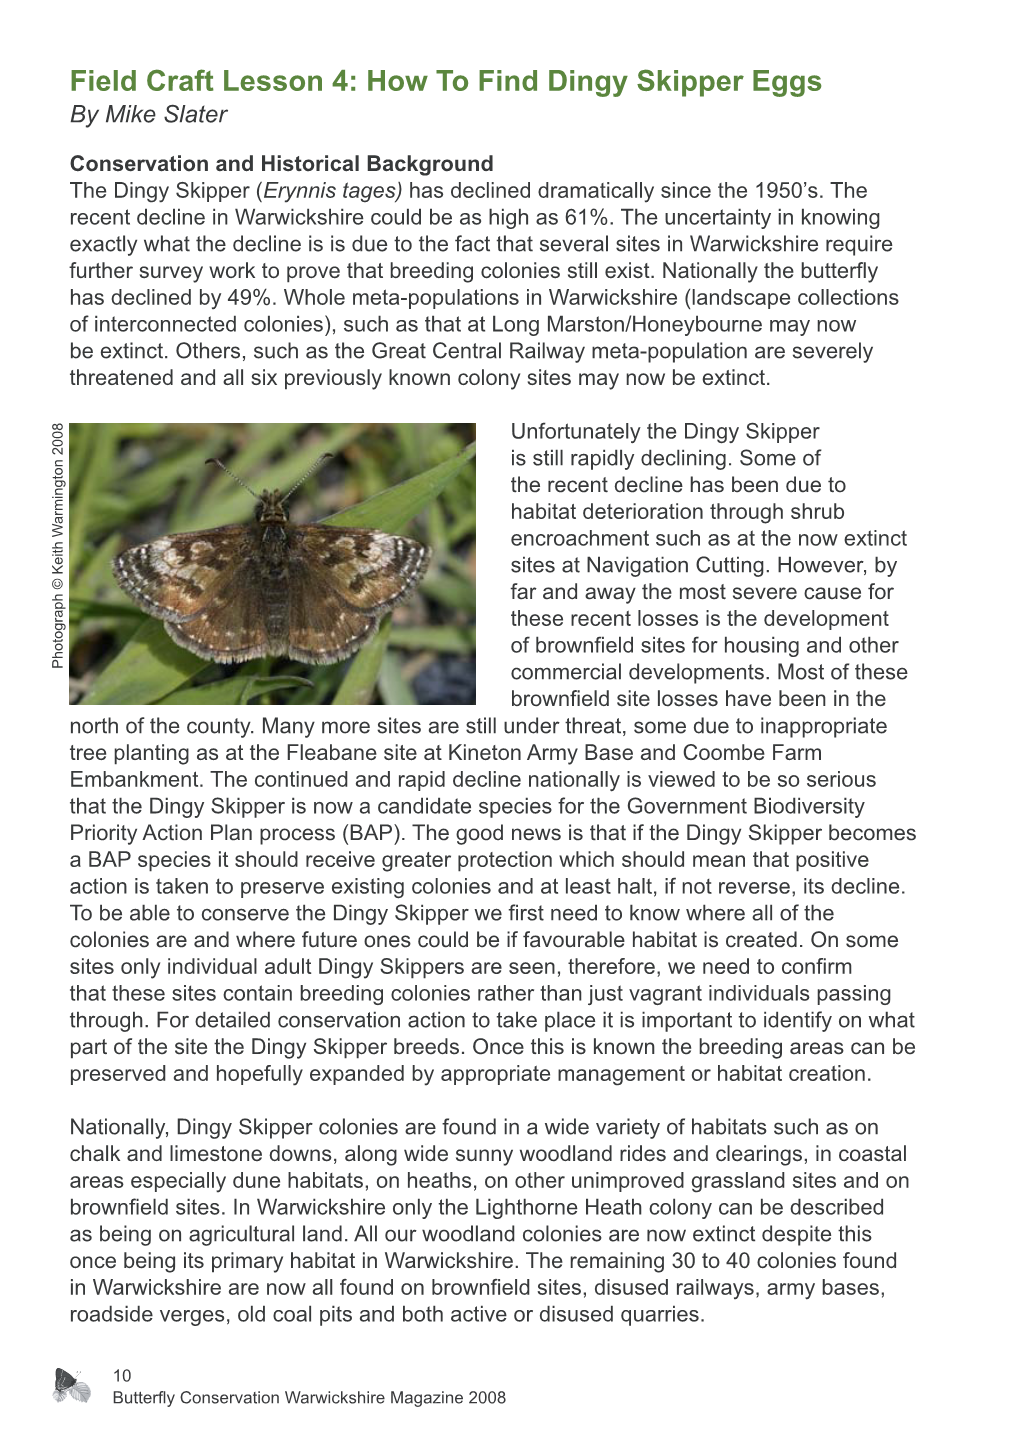 How to Find Dingy Skipper Eggs by Mike Slater